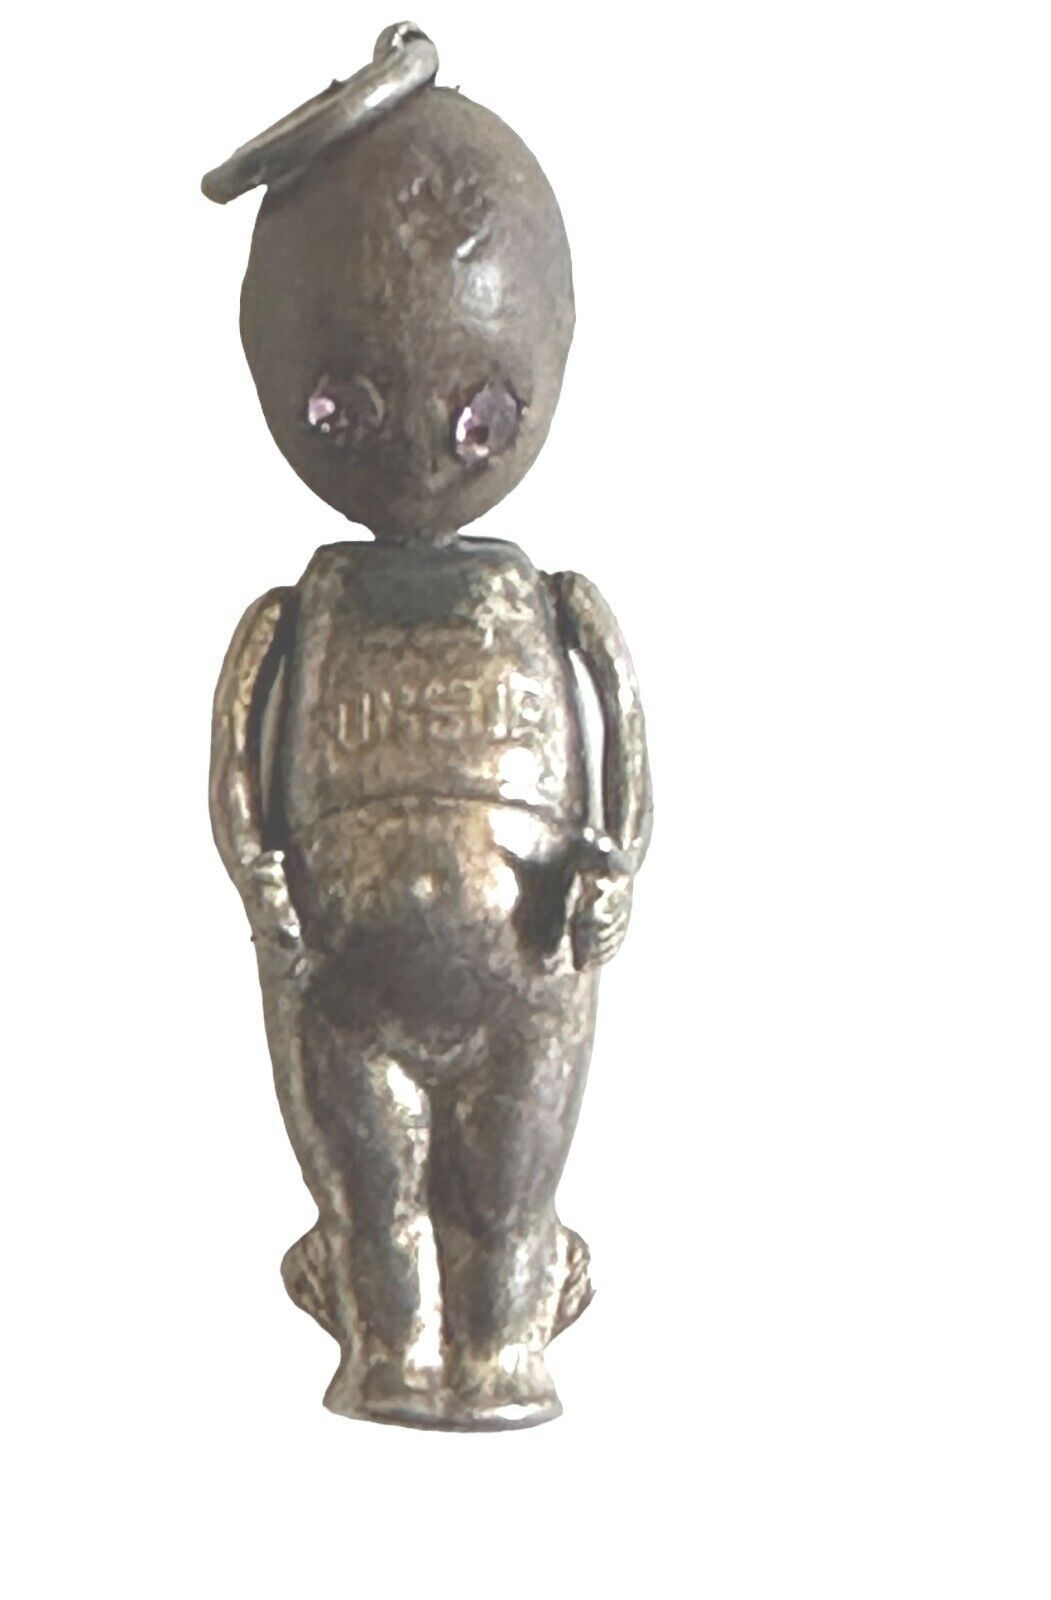 WW1 era Fumsup Silver and Wood Charm Doll with Purple Eyes - 30mm tall.